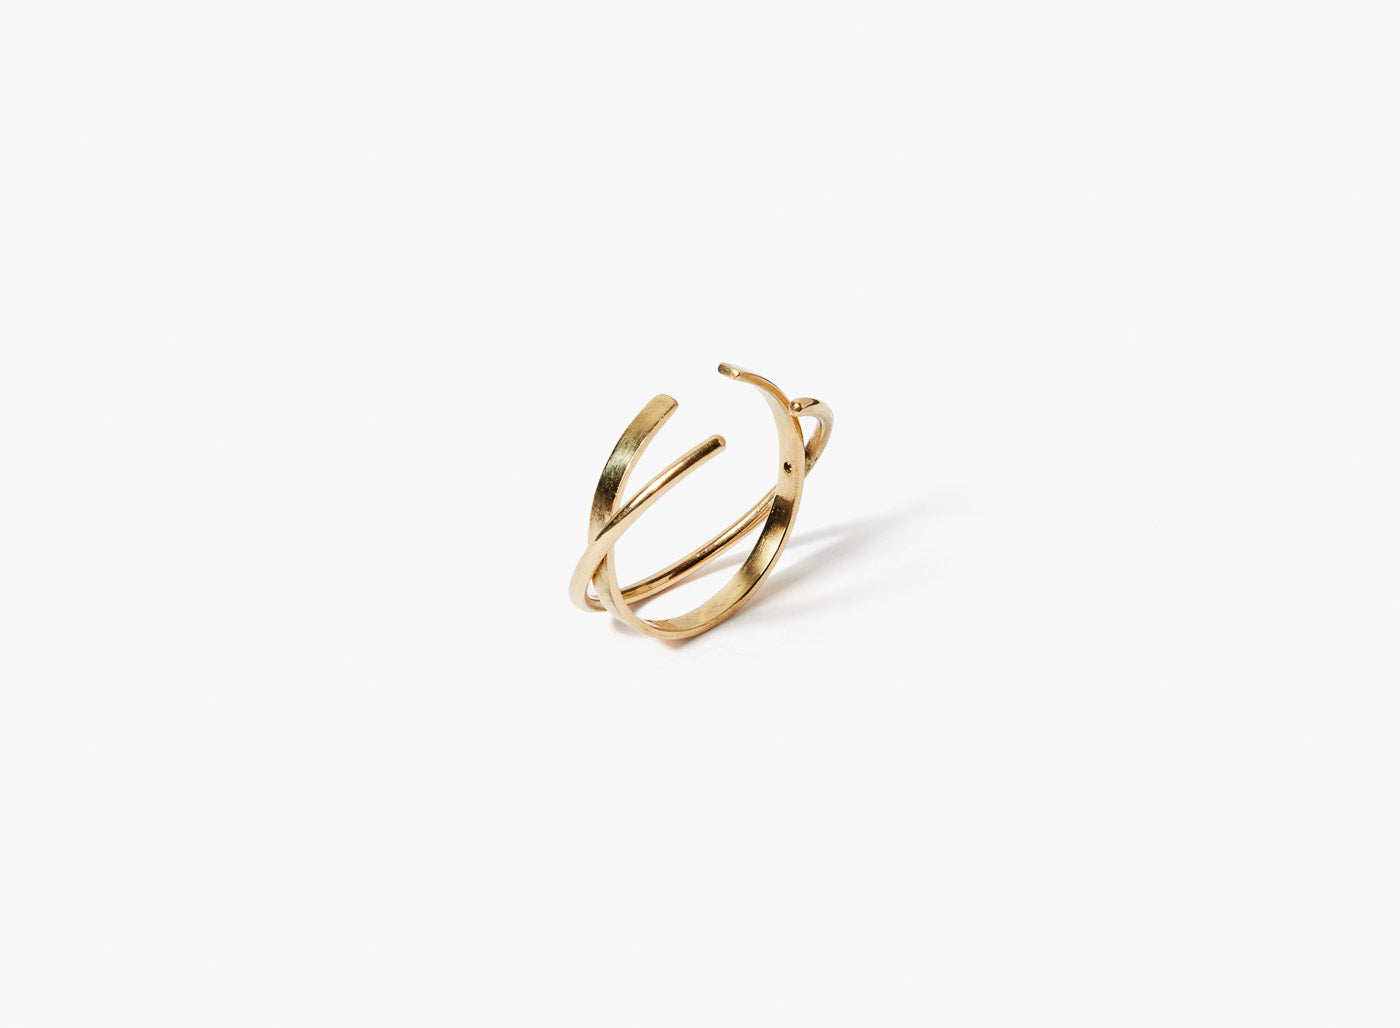 this adjustable 'hinged' 18k gold ring is hand forged in the title of work studio and features a 16 gauge solid wire that pivots over a 2.5mm flat bar.